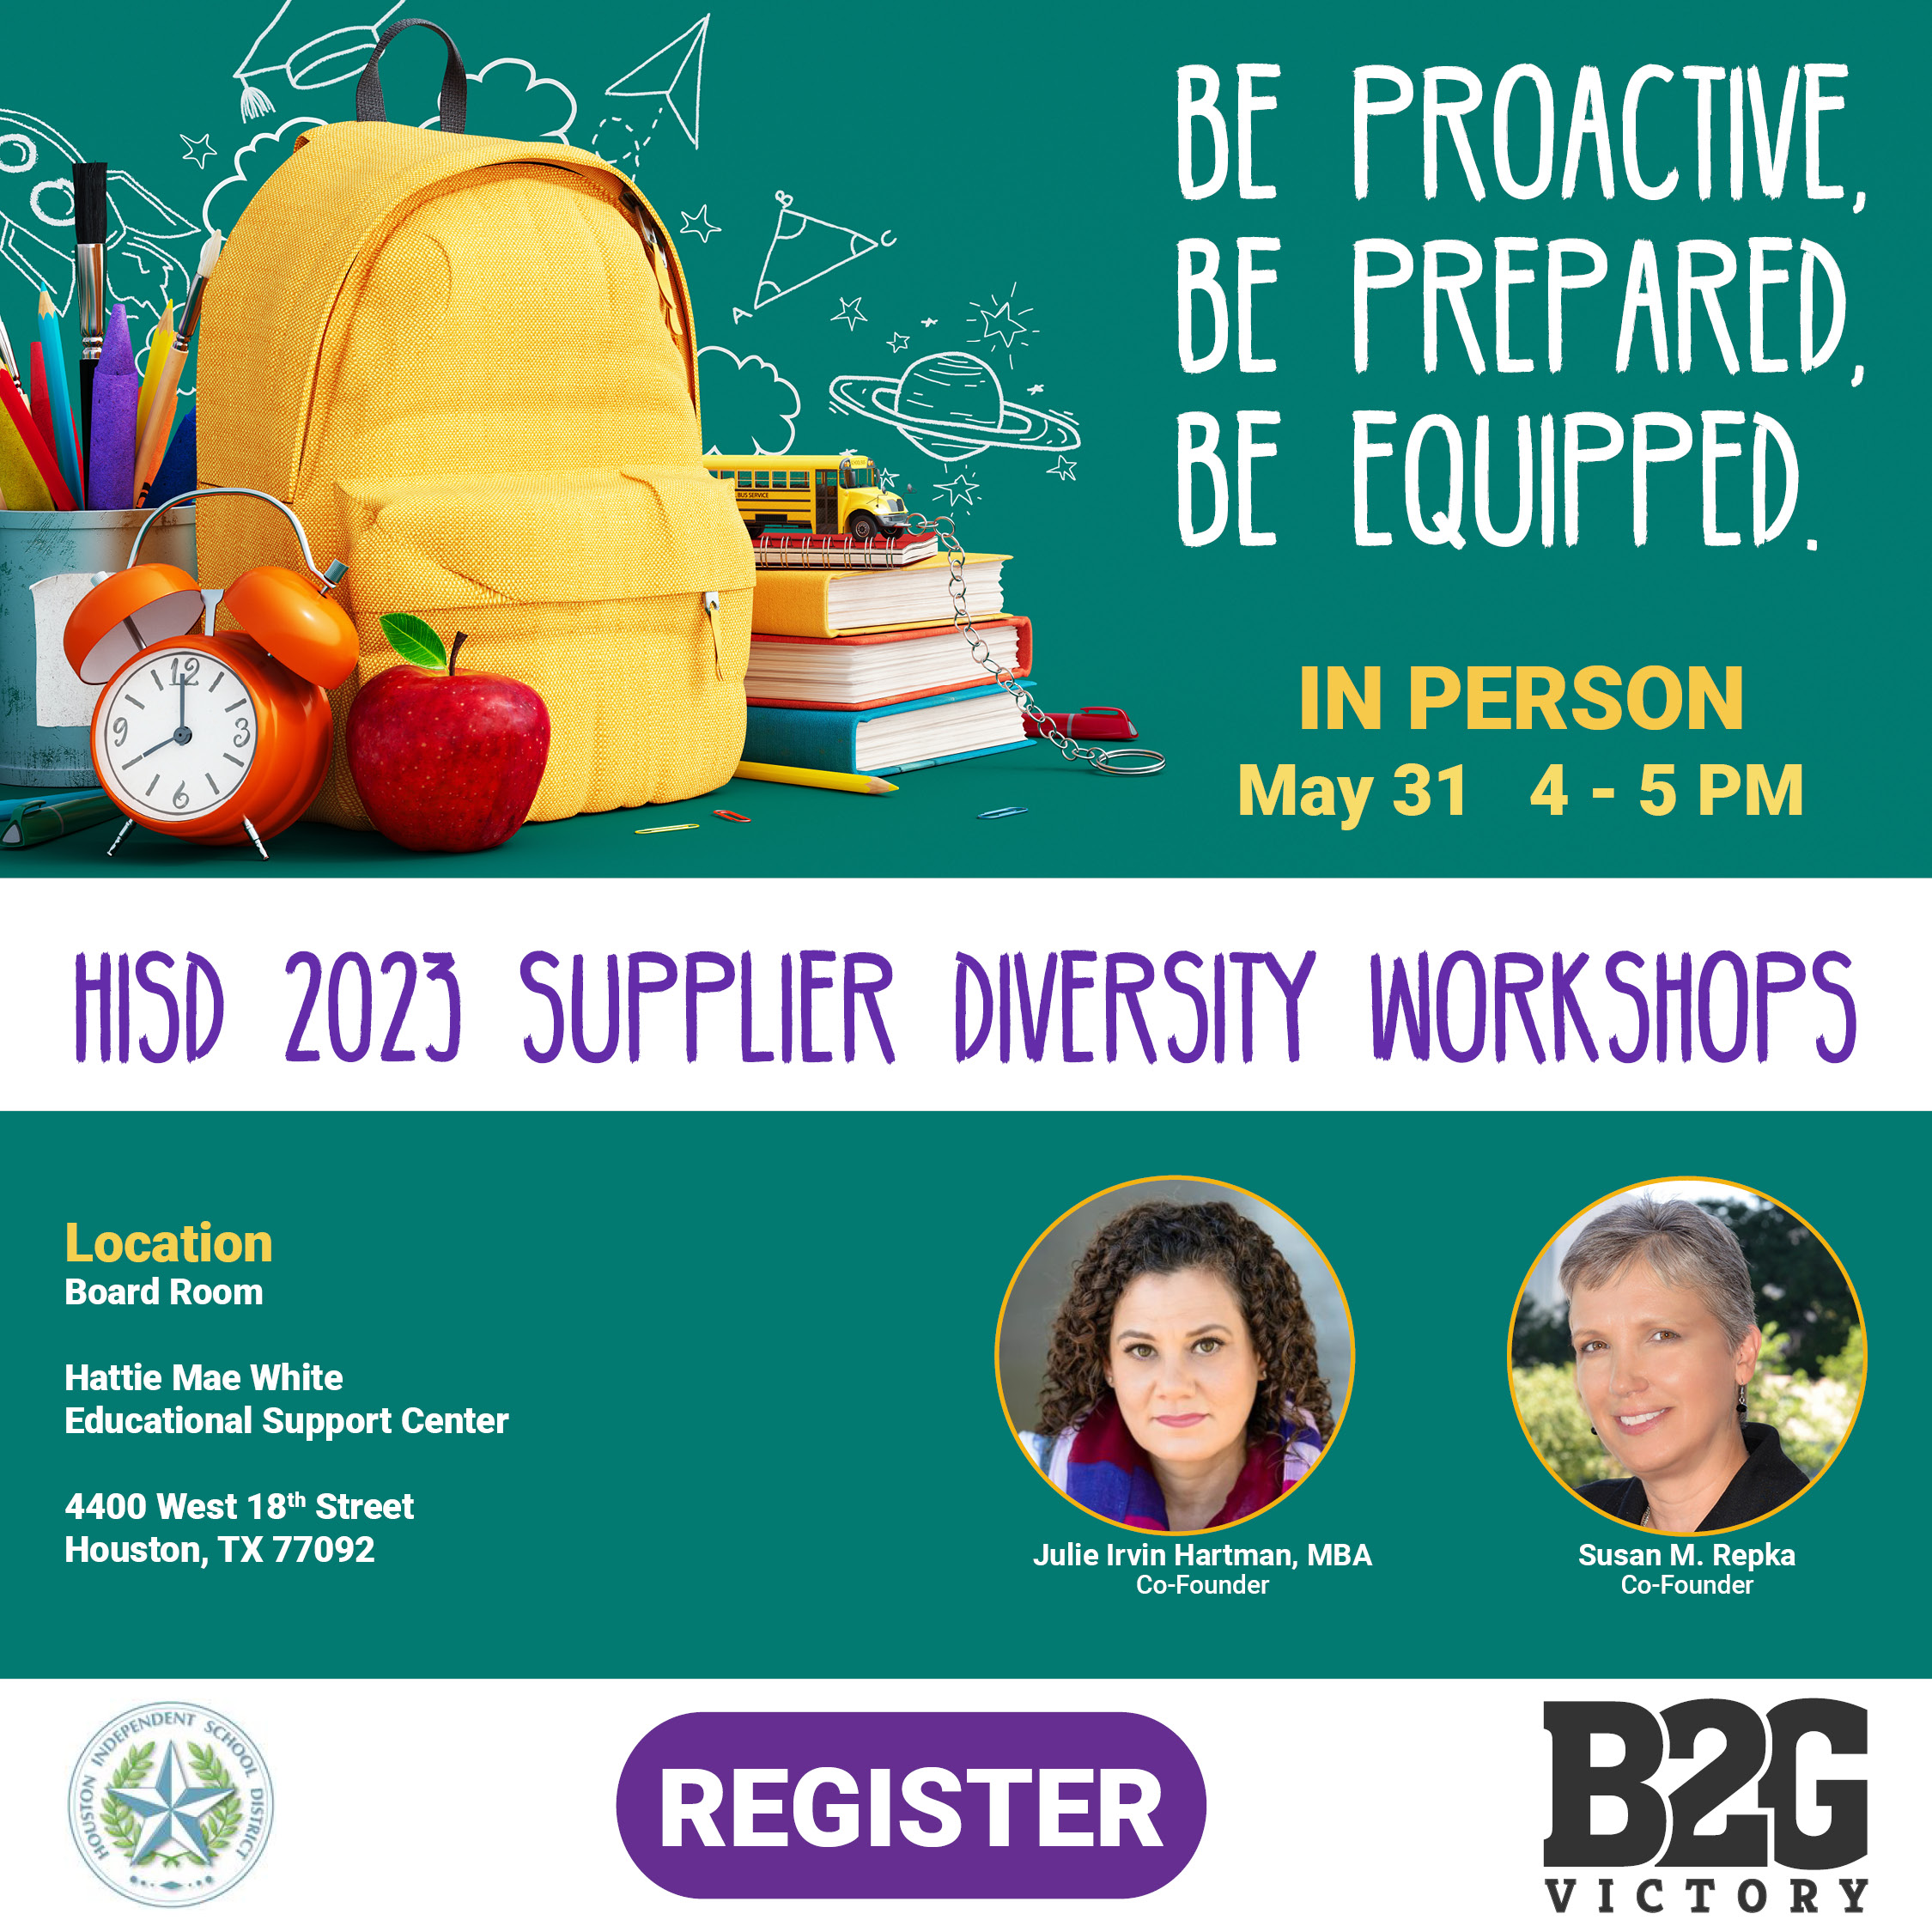 Be Proactive, Be Prepared, Be Equipped with HISD